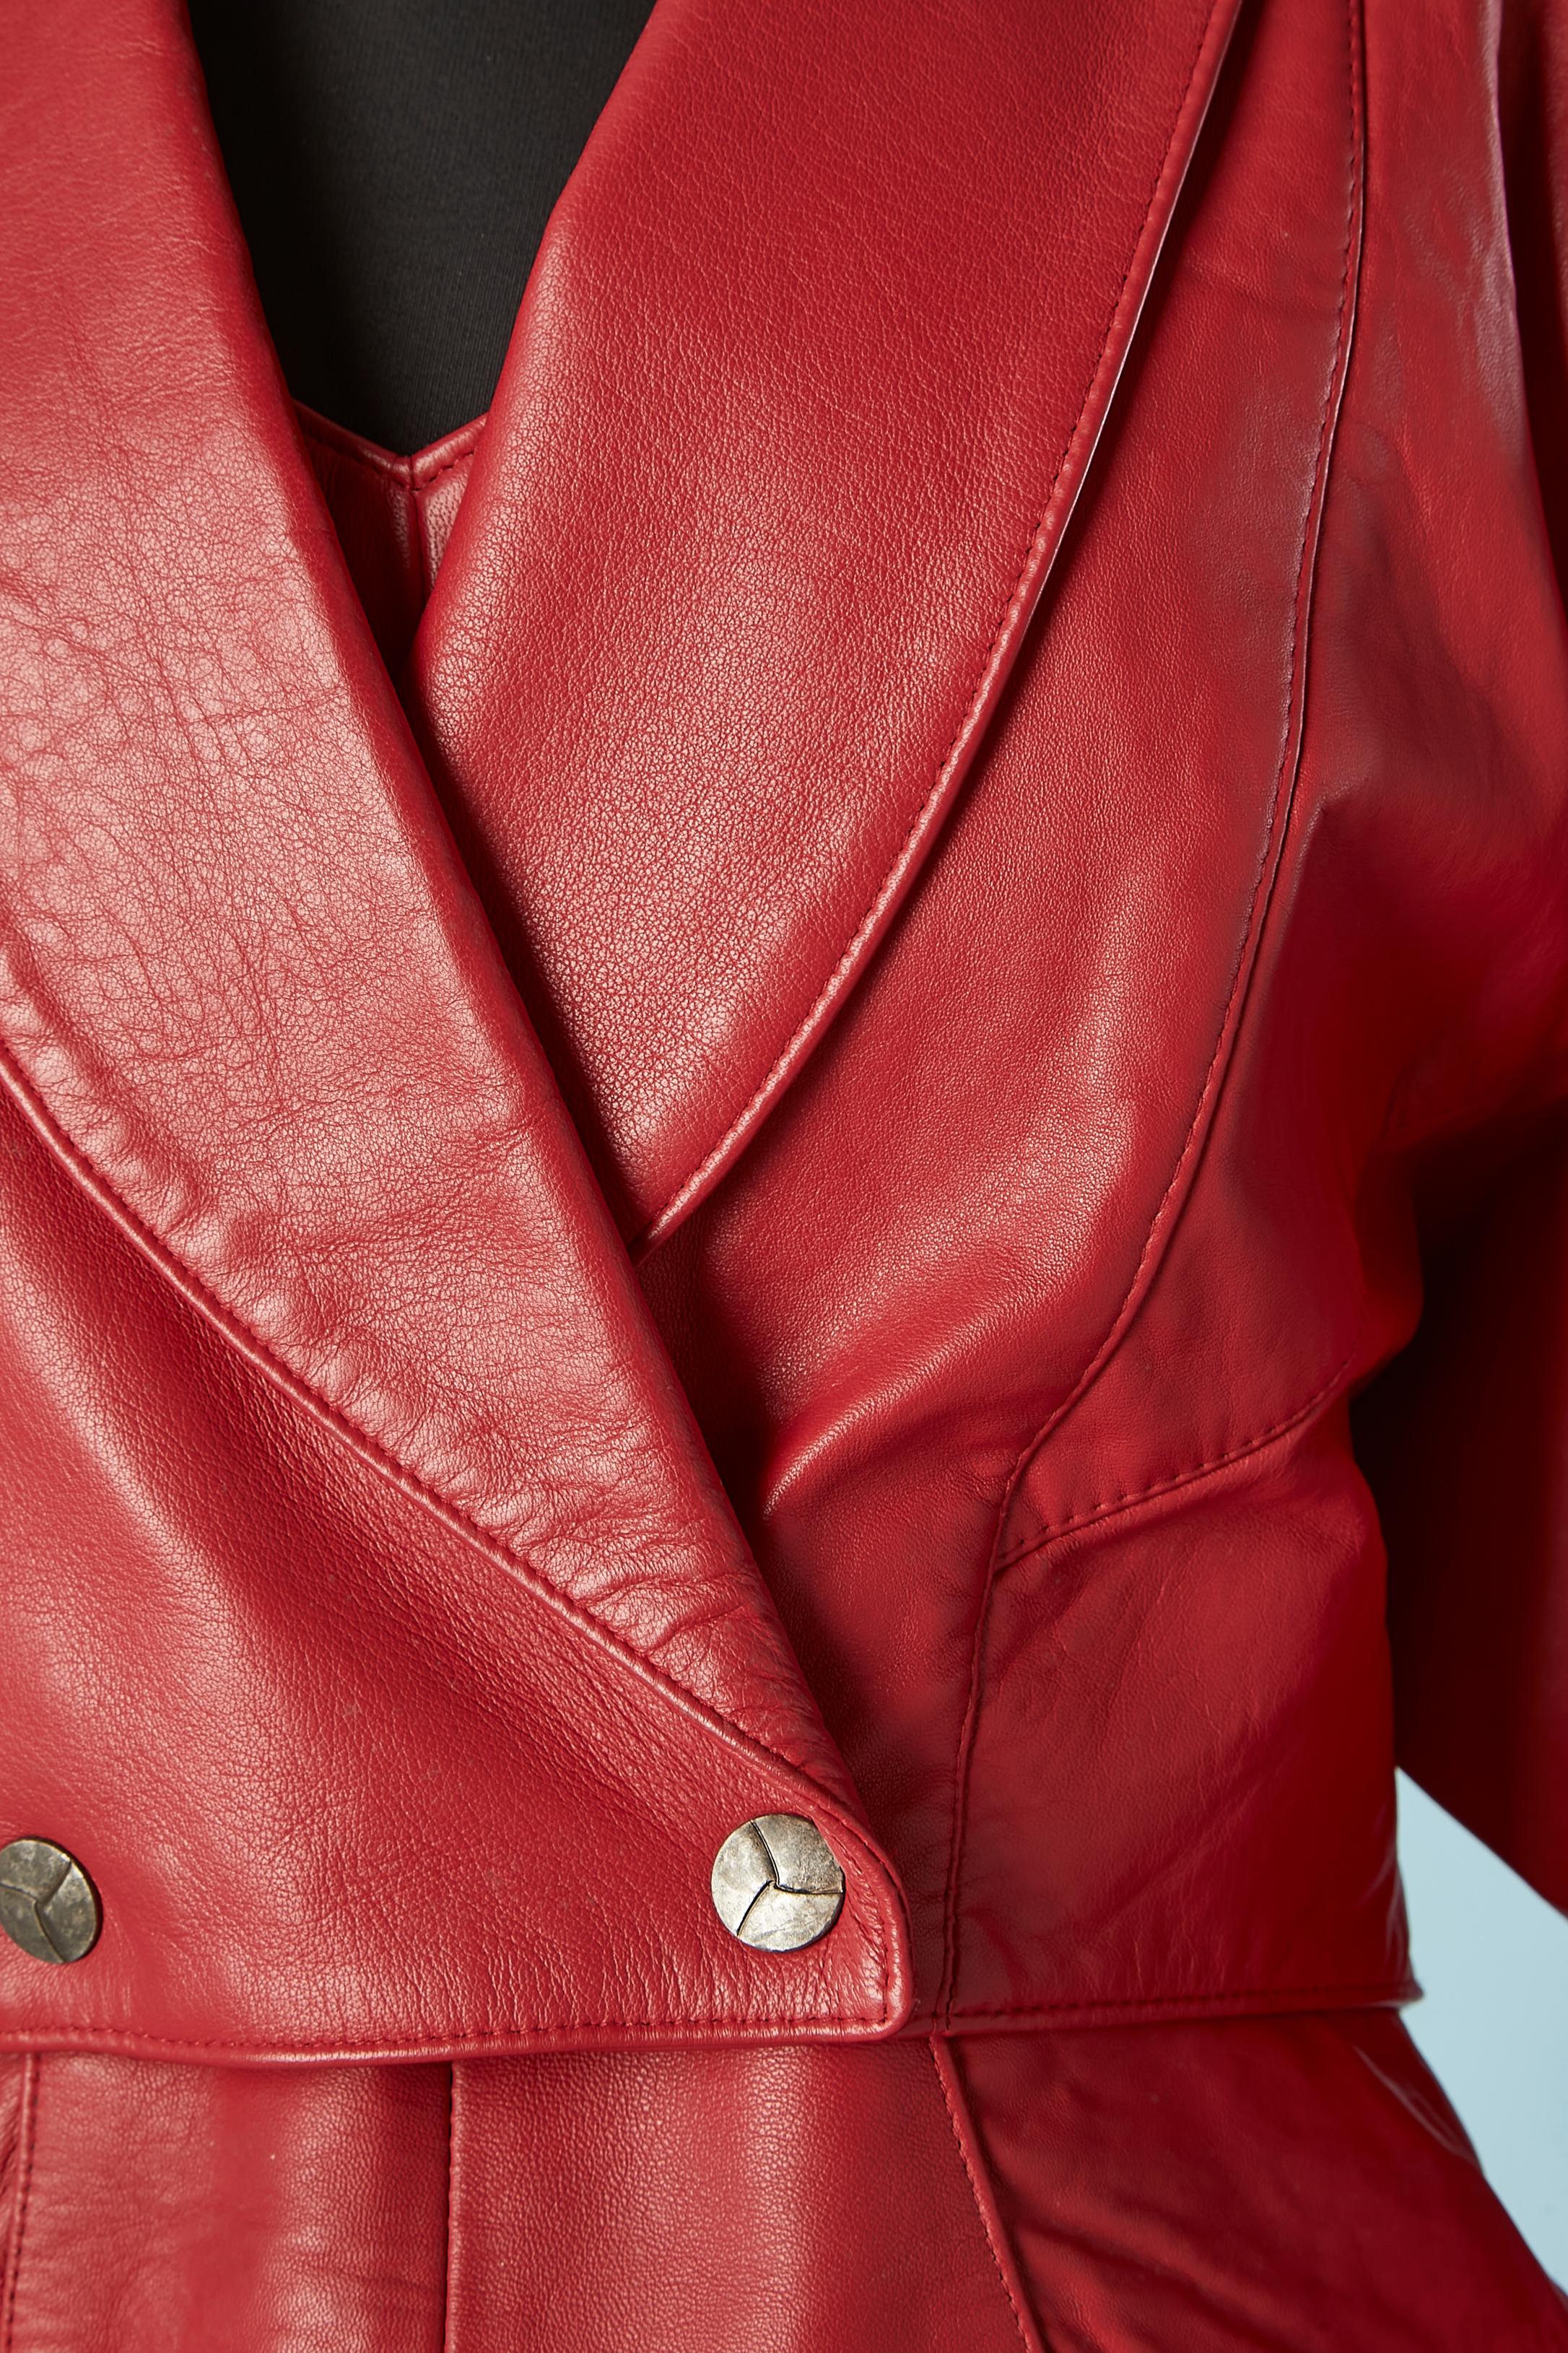 Red leather jacket and bustier dress. Main fabric composition: Genuine leather. Lining: Rayon
Snap middle front, shoulder-pad and cut-work on the jacket. 
SIZE 9/10
